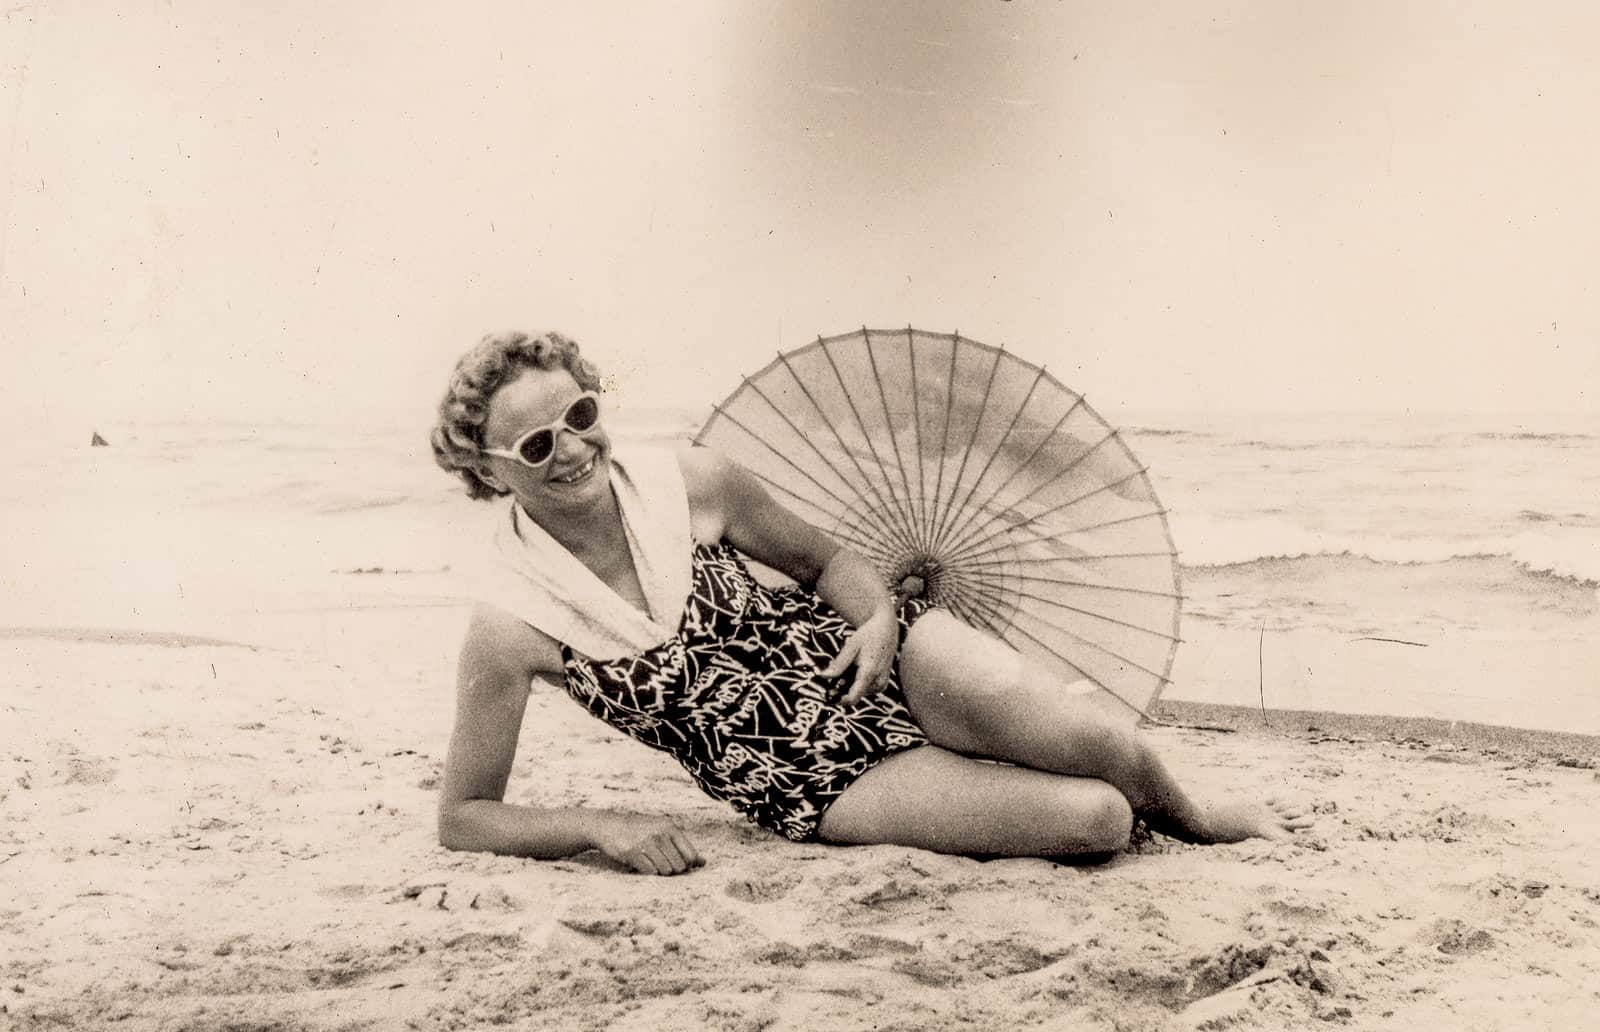 old-picture-of-vacationer-on-beach-at-timeshare-resort-for-history-lesson-on-the-beginnings-of-fractional-ownership